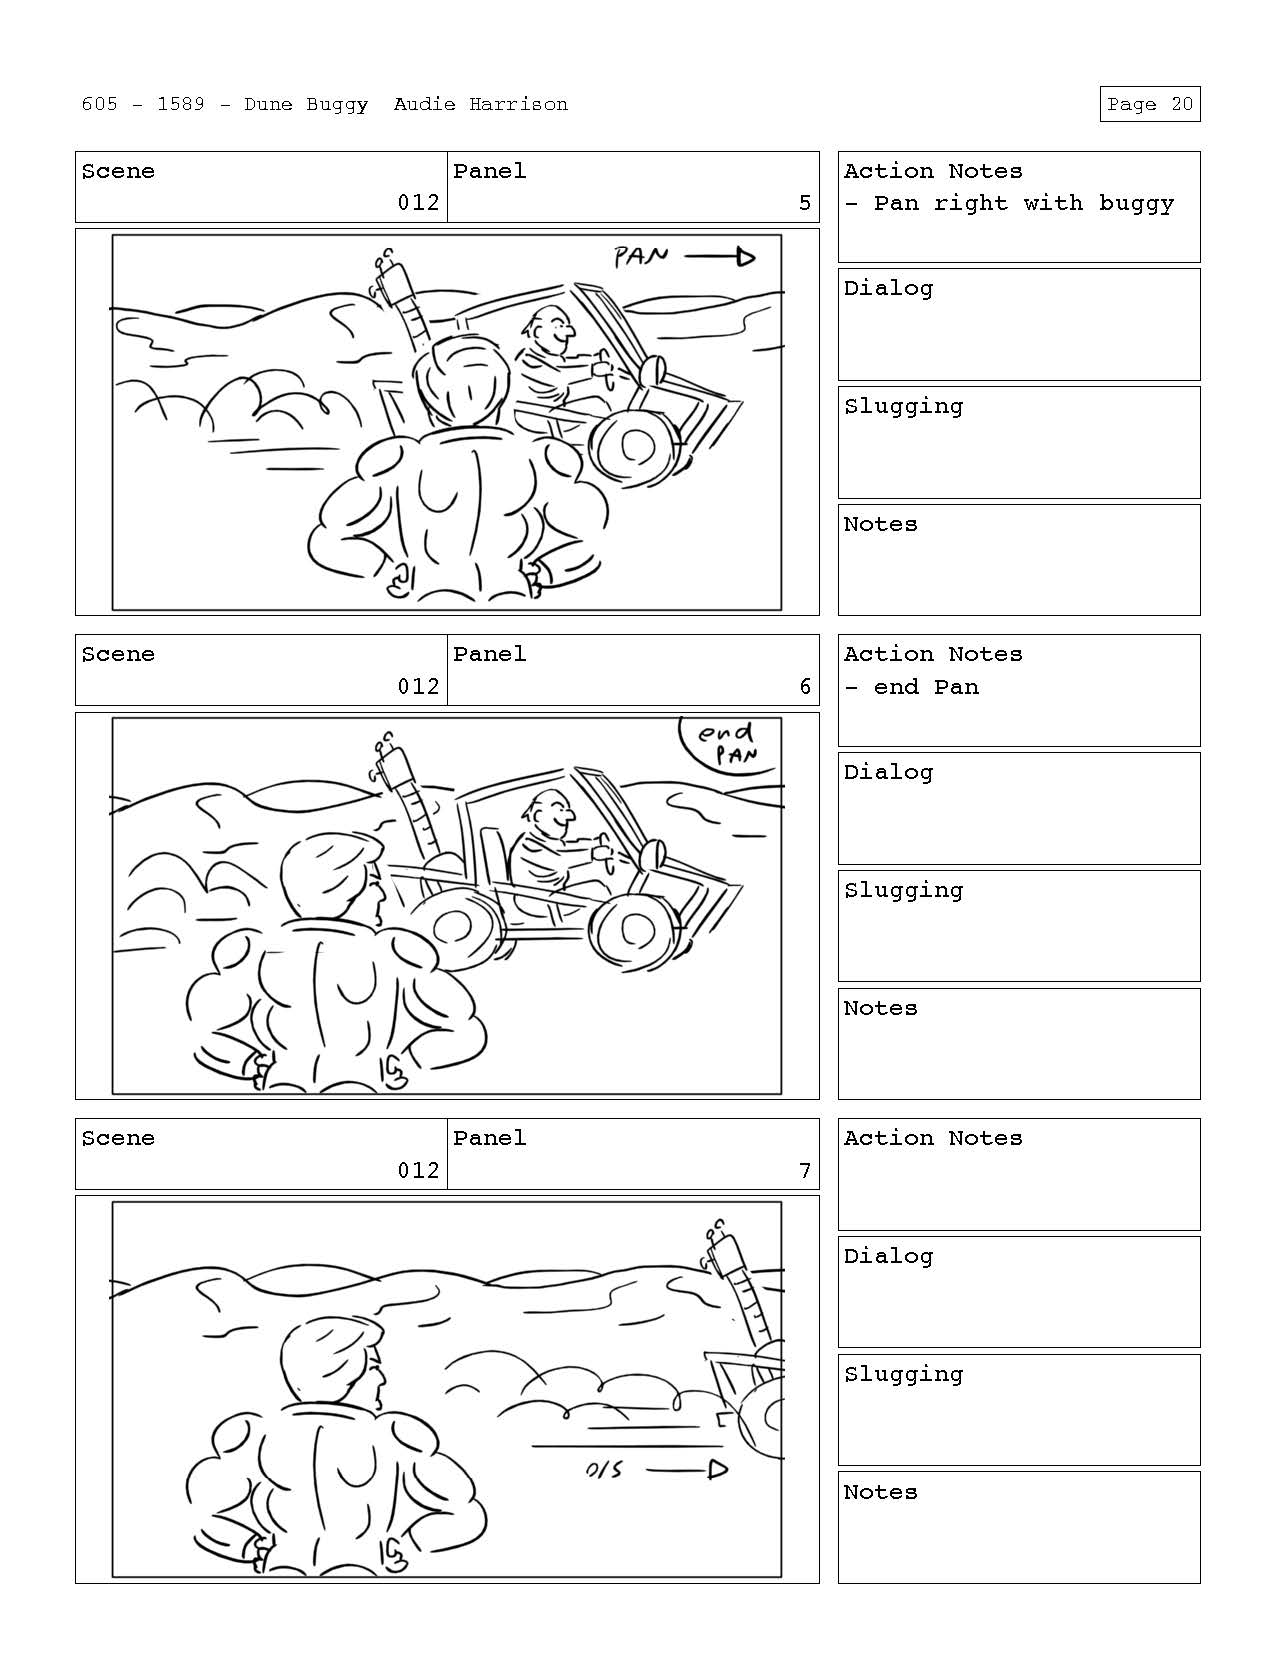 Dune_Buggy_Page_21.jpg